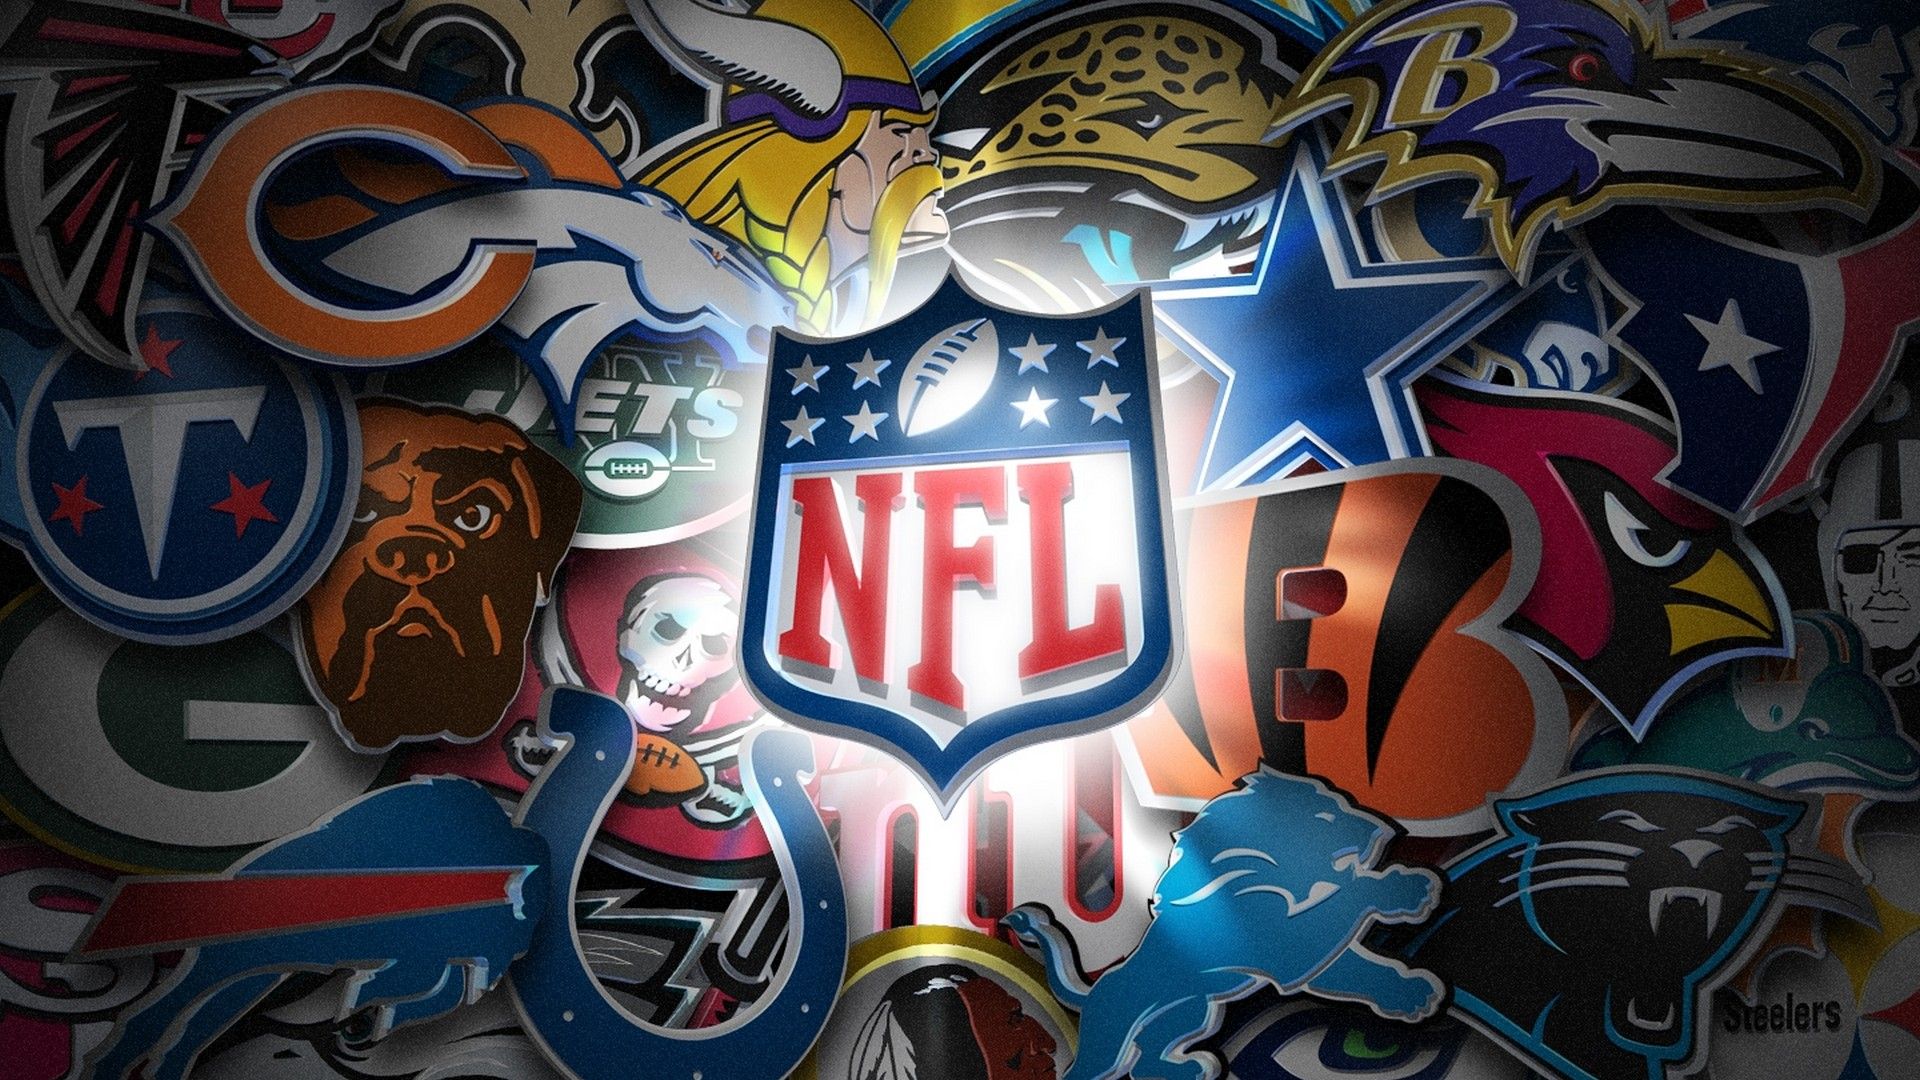 Cool Football Backgrounds